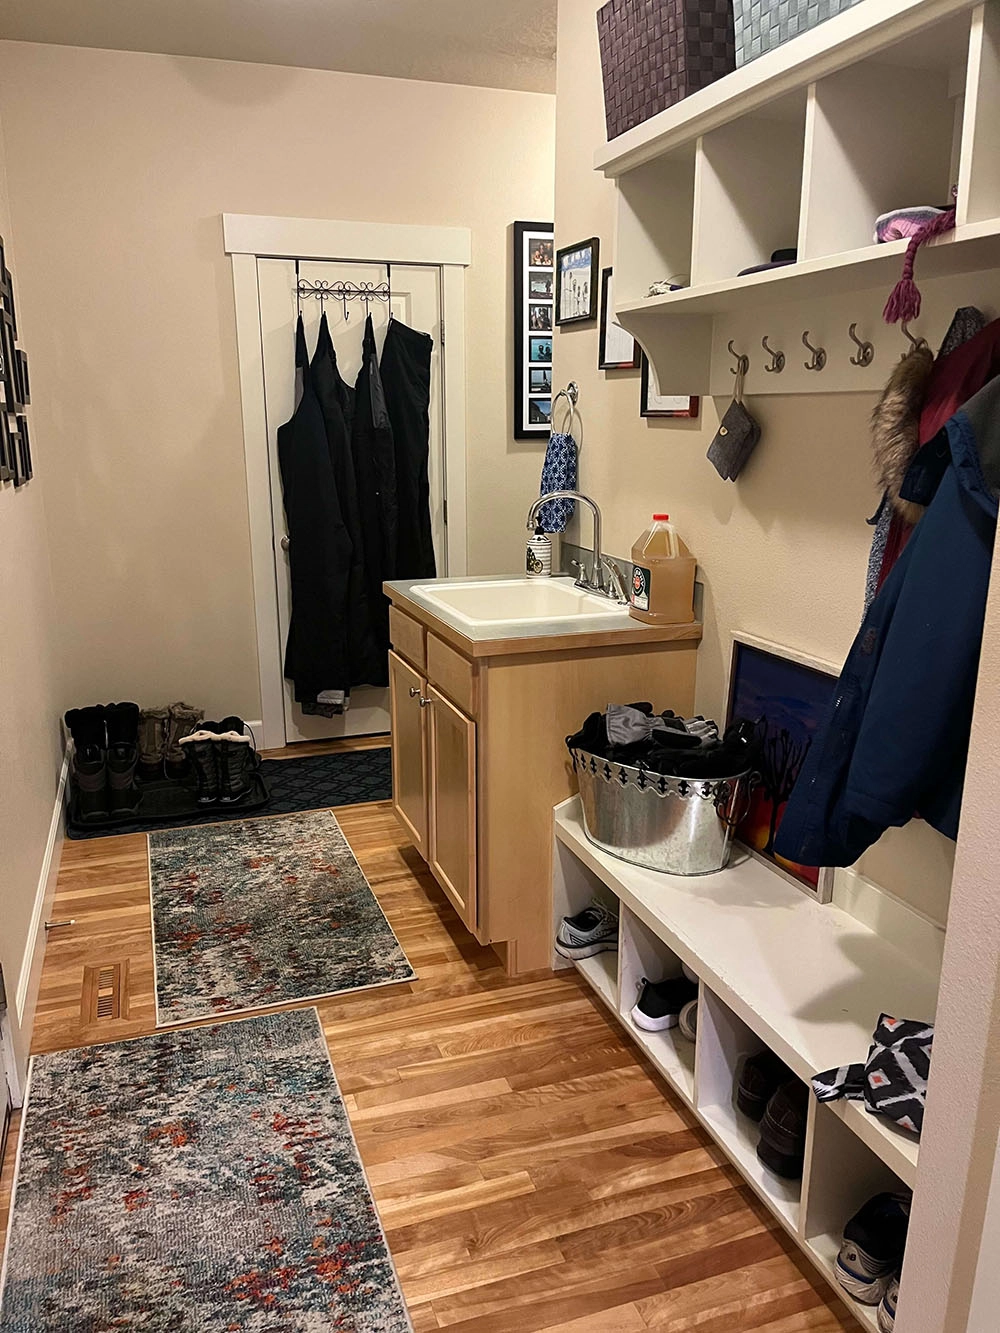 Mudroom before Tammie Coffey’s redesign